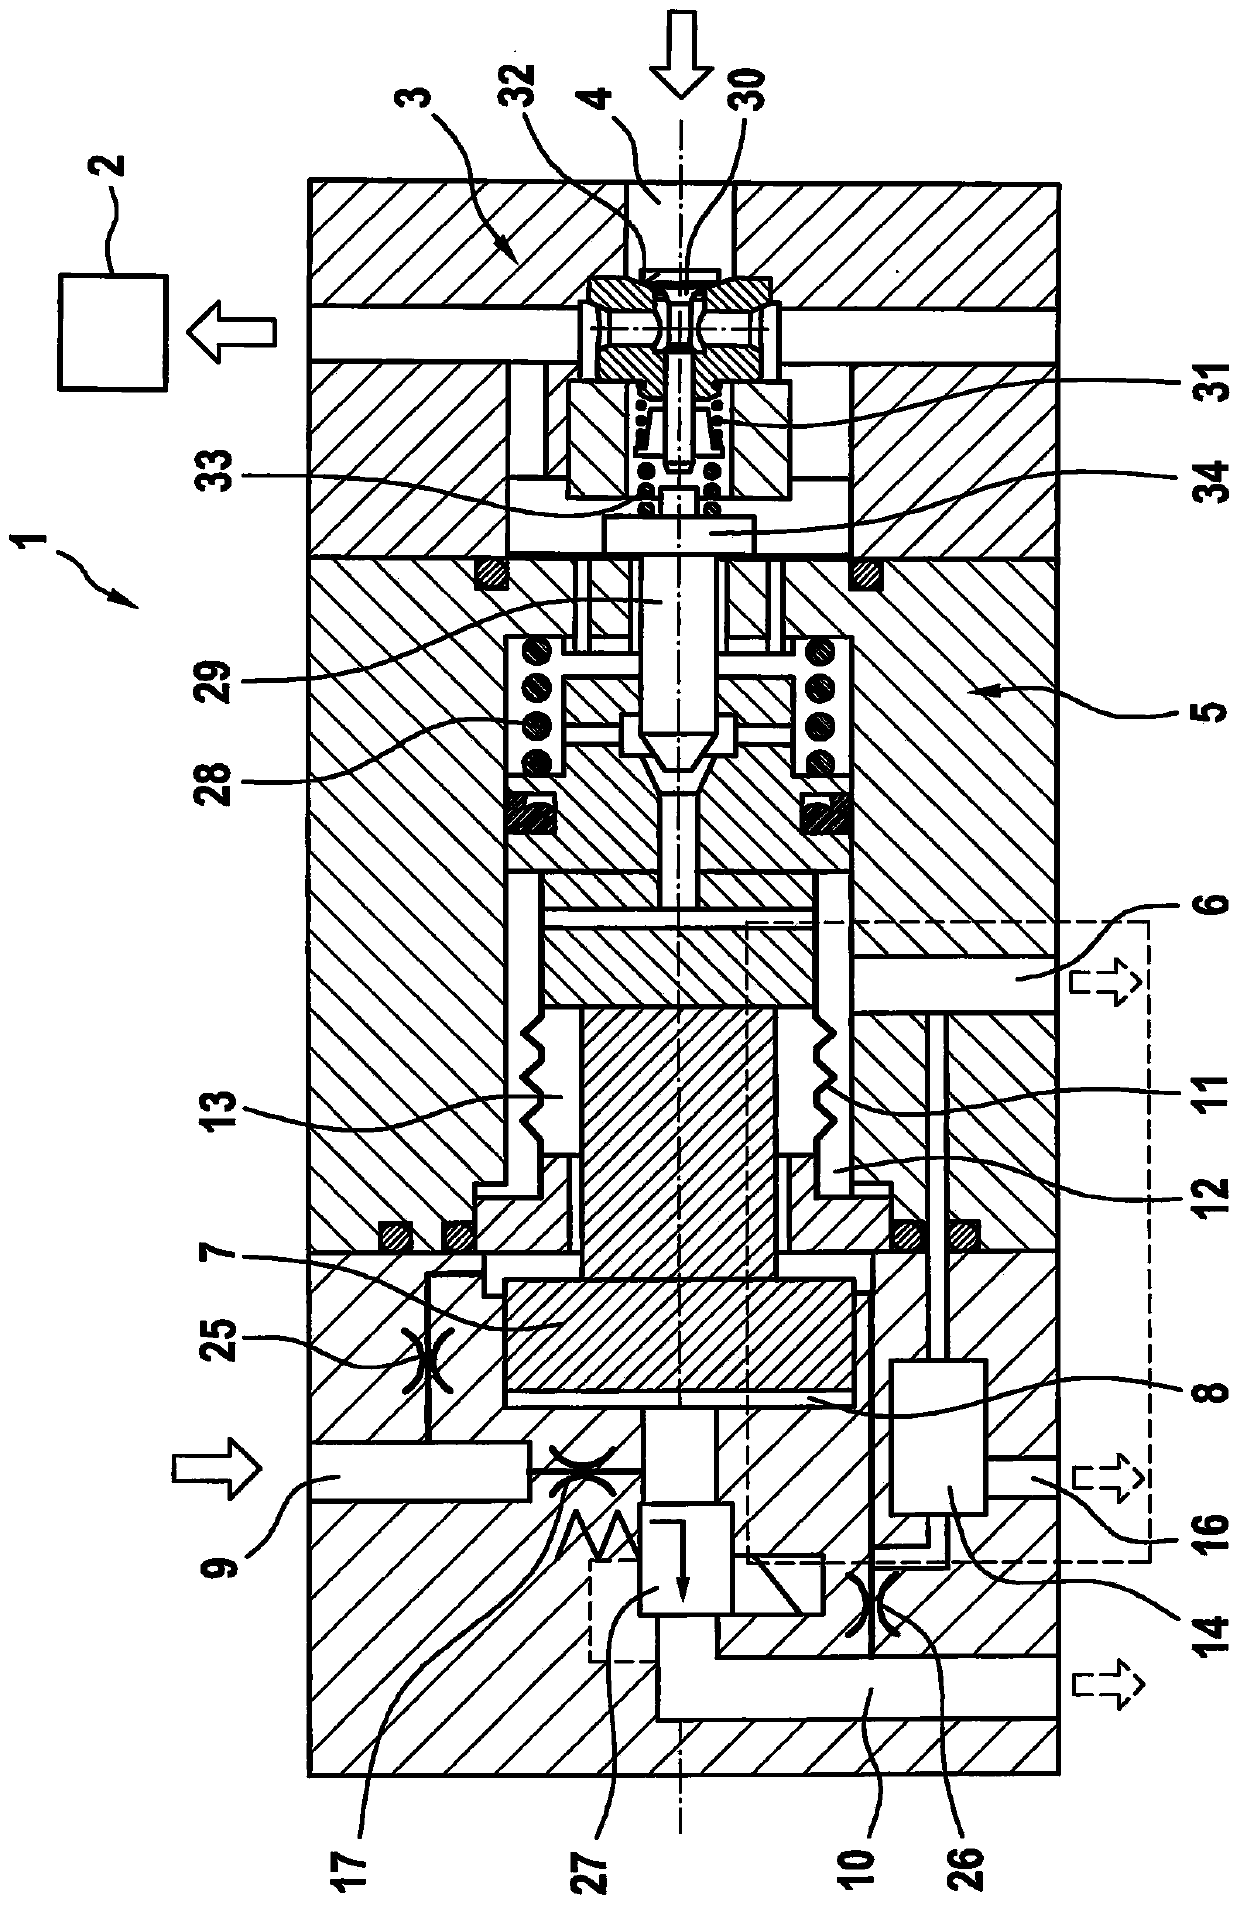 Valve assembly for controlling gas pressure, fuel system comprising valve assembly for controlling gas pressure